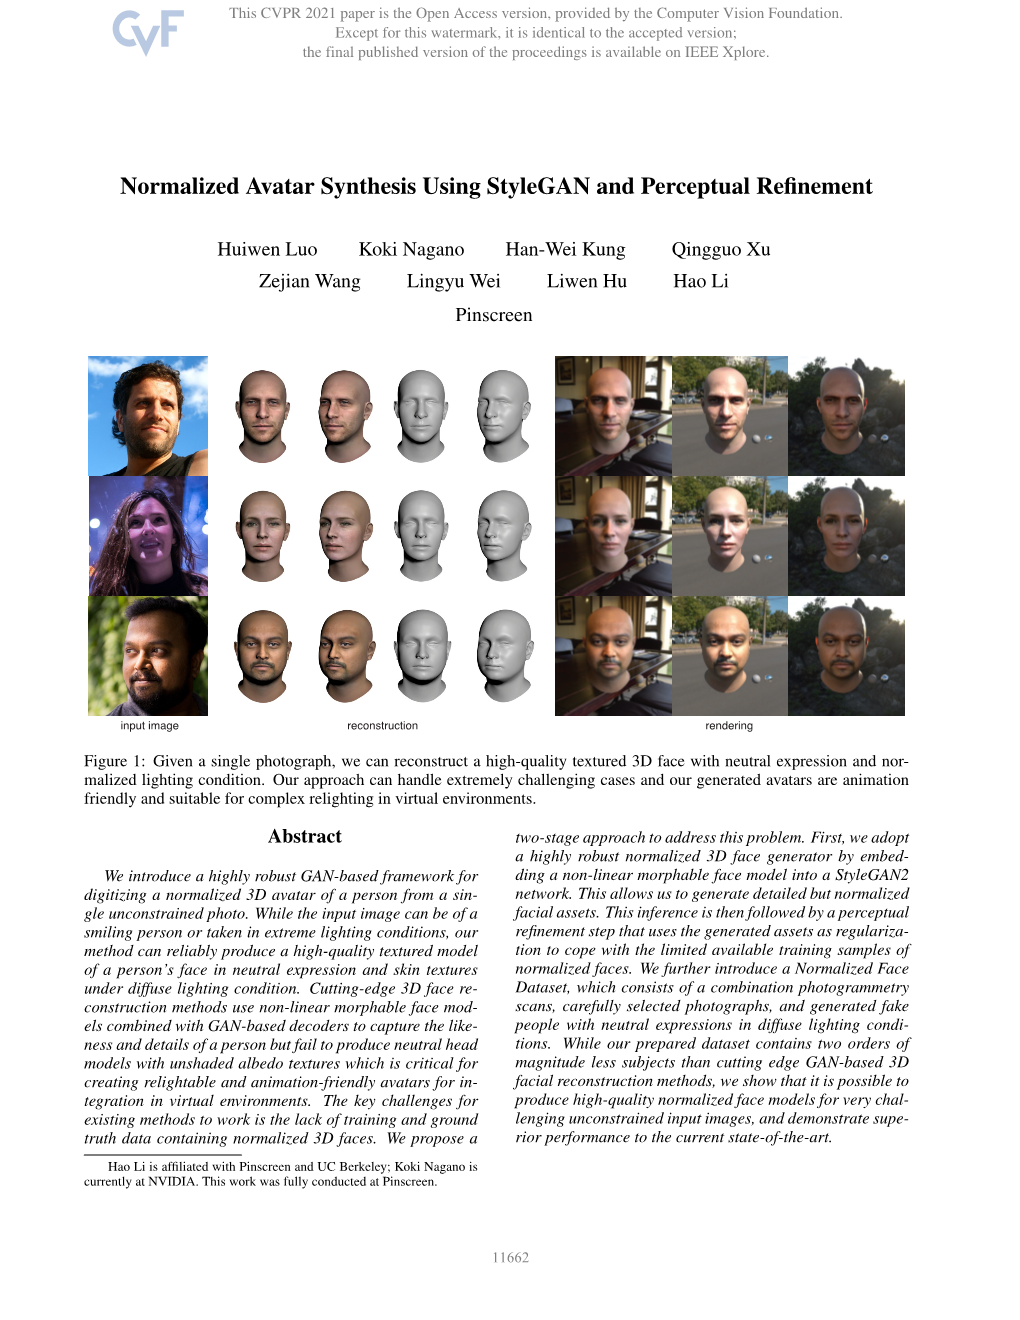 Normalized Avatar Synthesis Using Stylegan and Perceptual Refinement